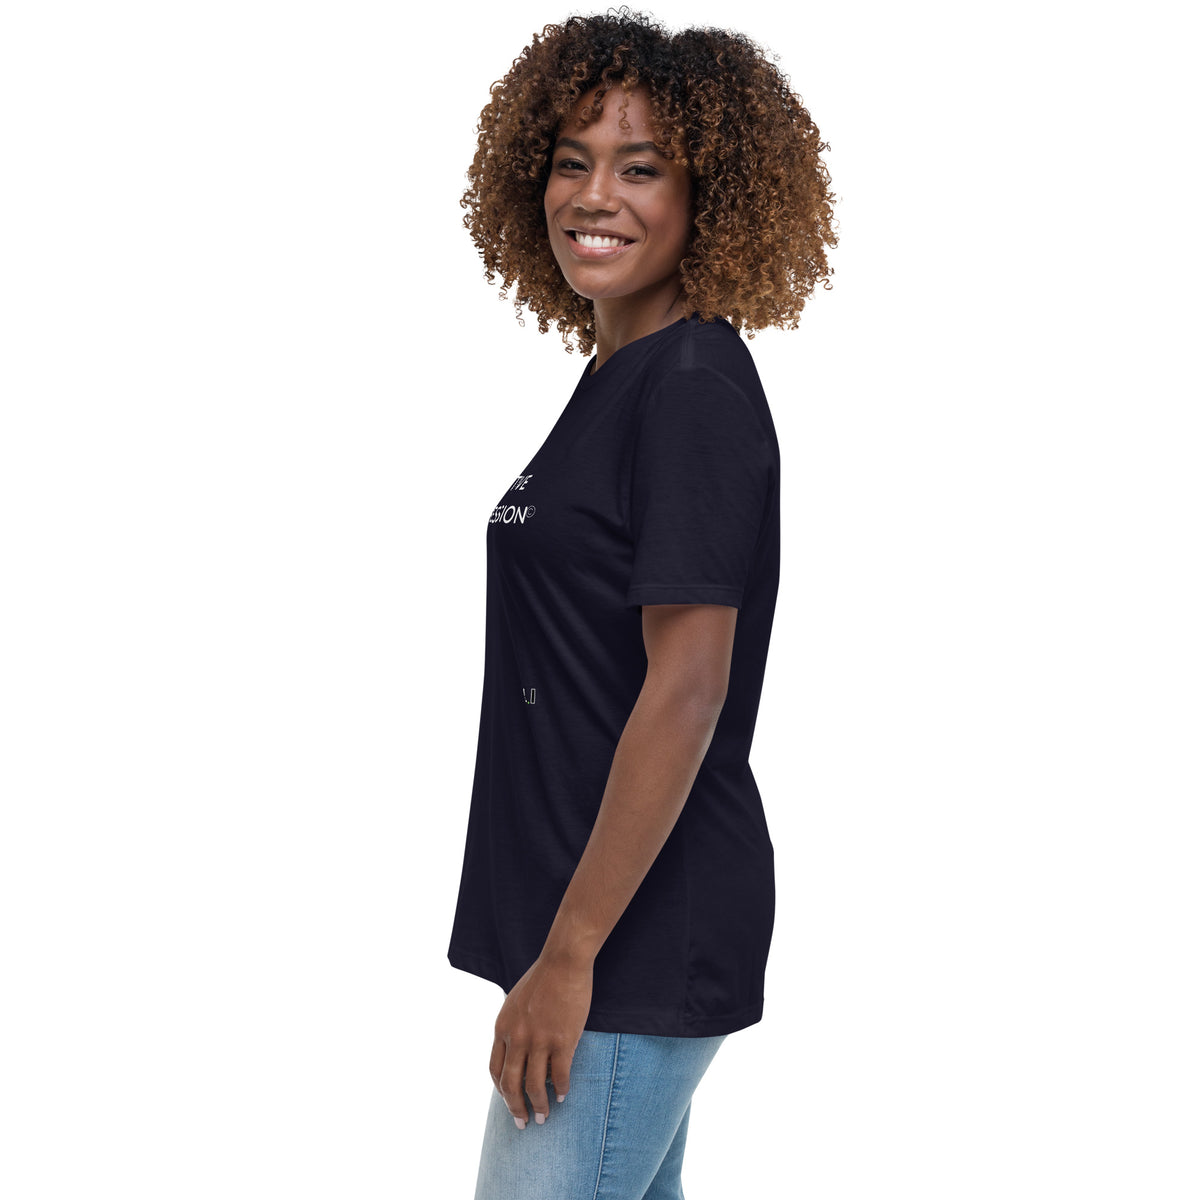 Positive Aggression - Women's Relaxed T-Shirt